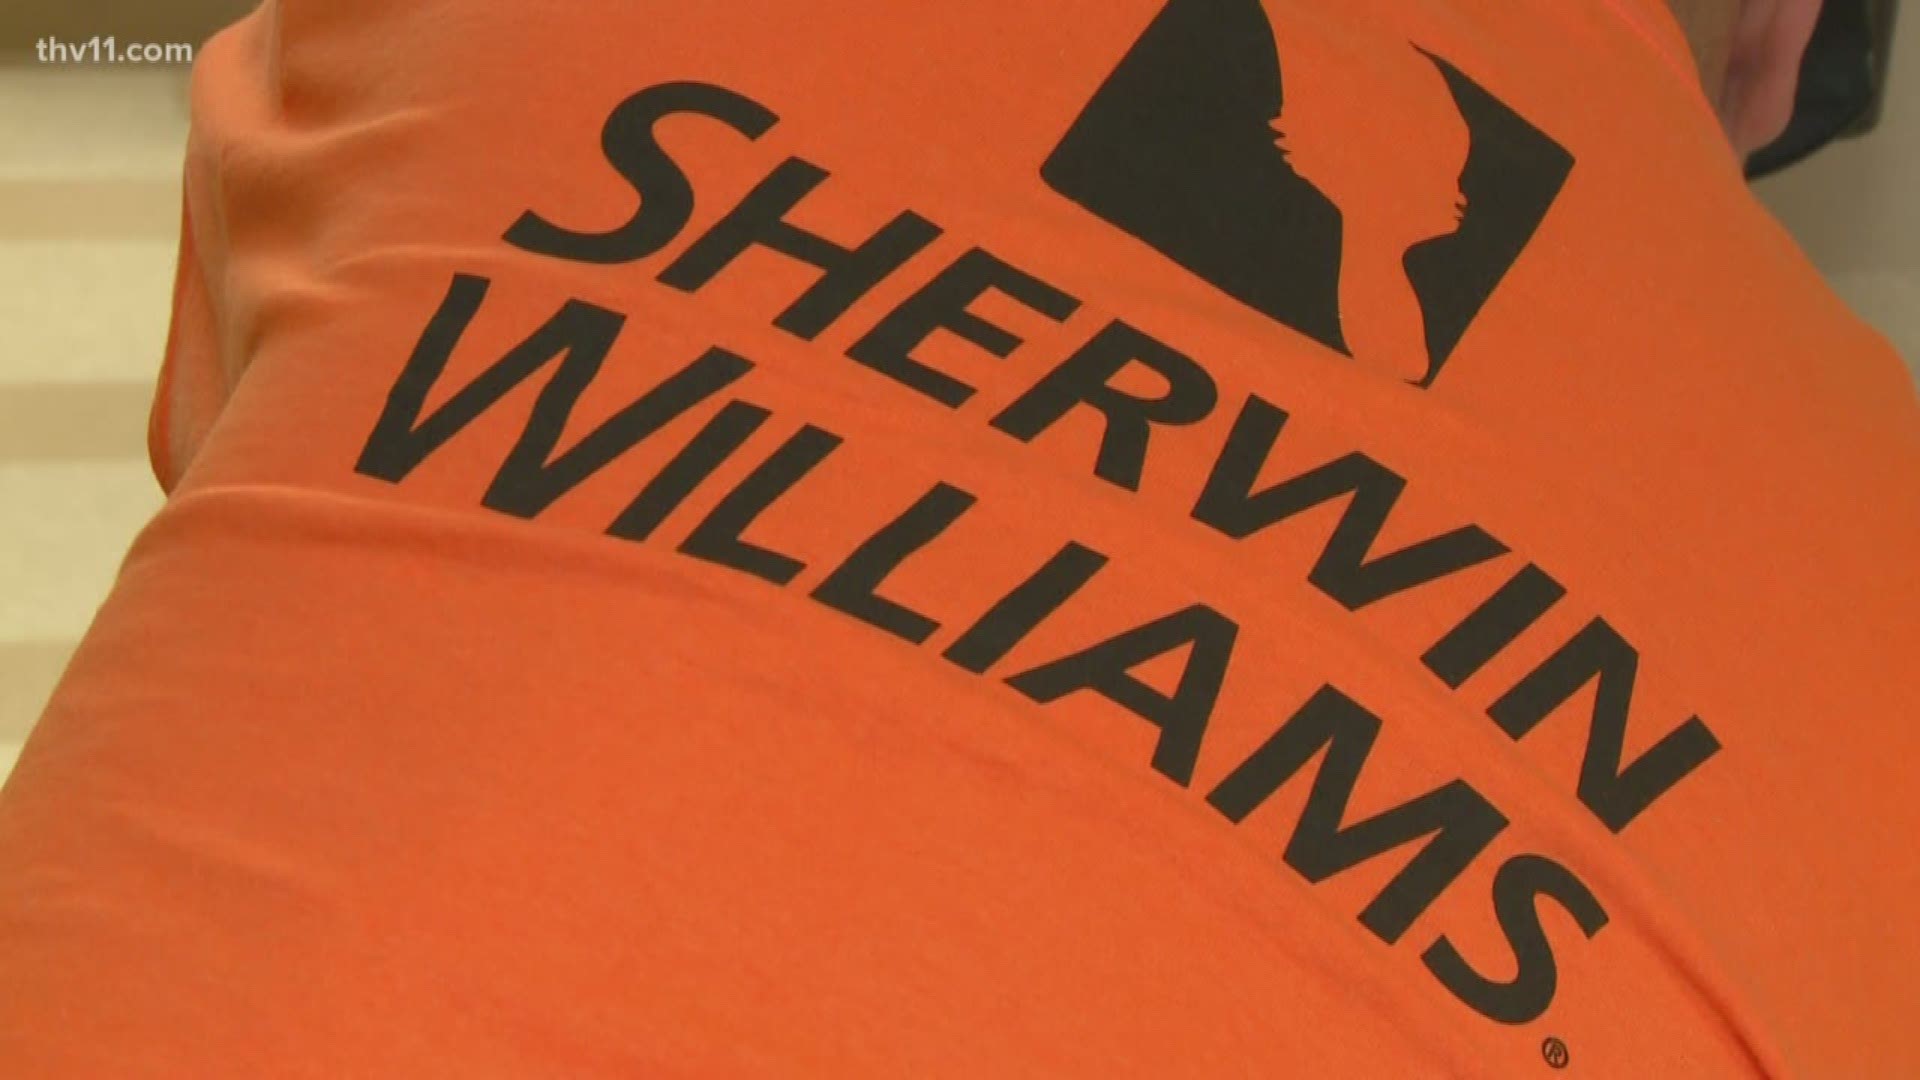 The Maumelle Animal Shelter got an upgrade today, as part of a service project from Sherwin.